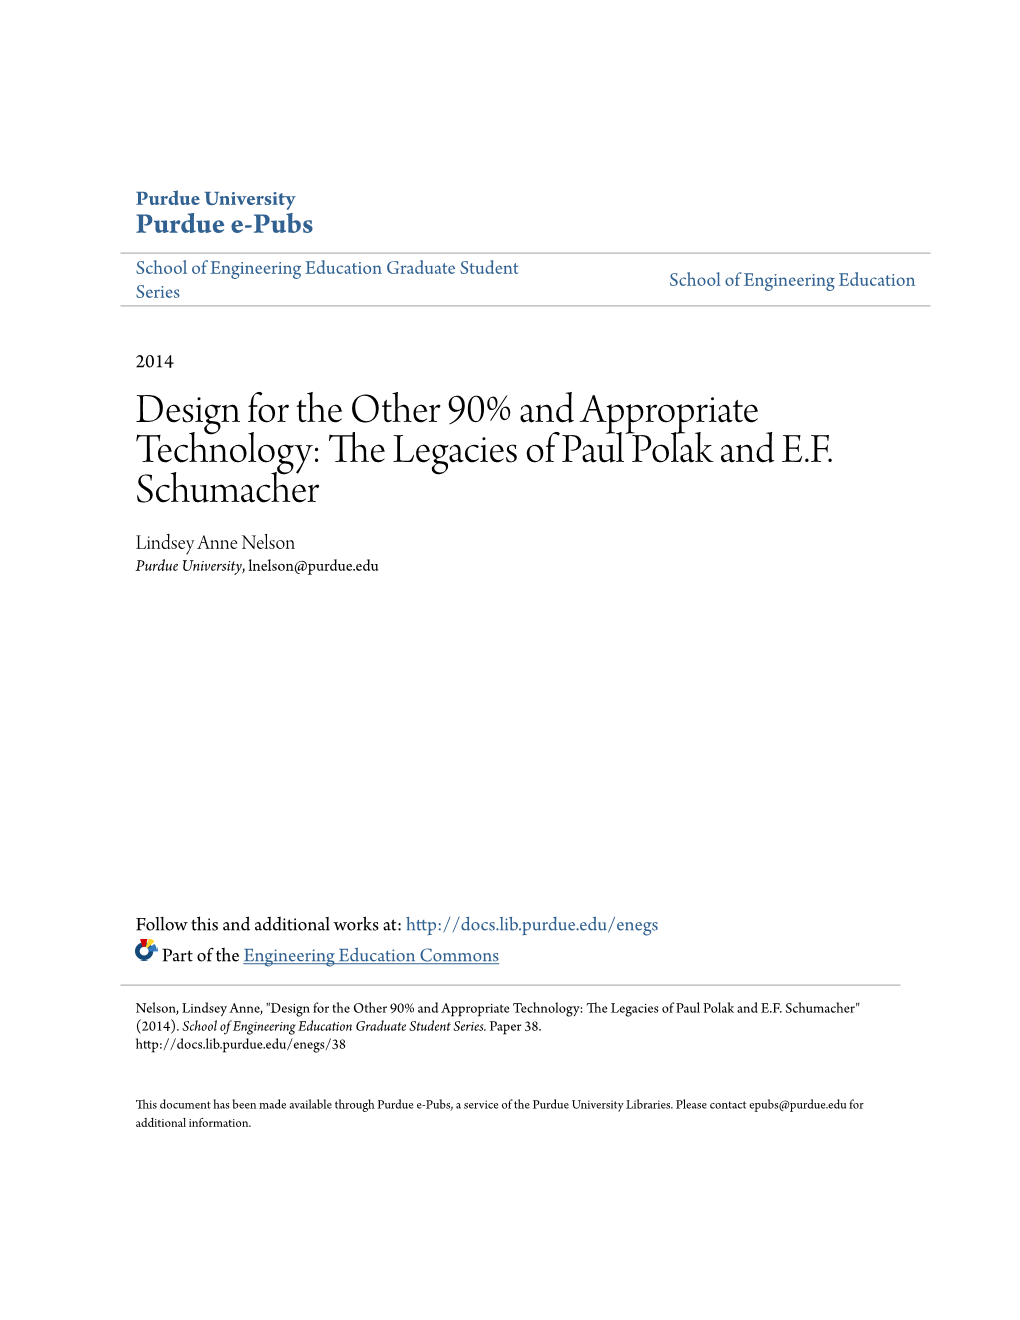 Design for the Other 90% and Appropriate Technology: the Legacies of Paul Polak and E.F